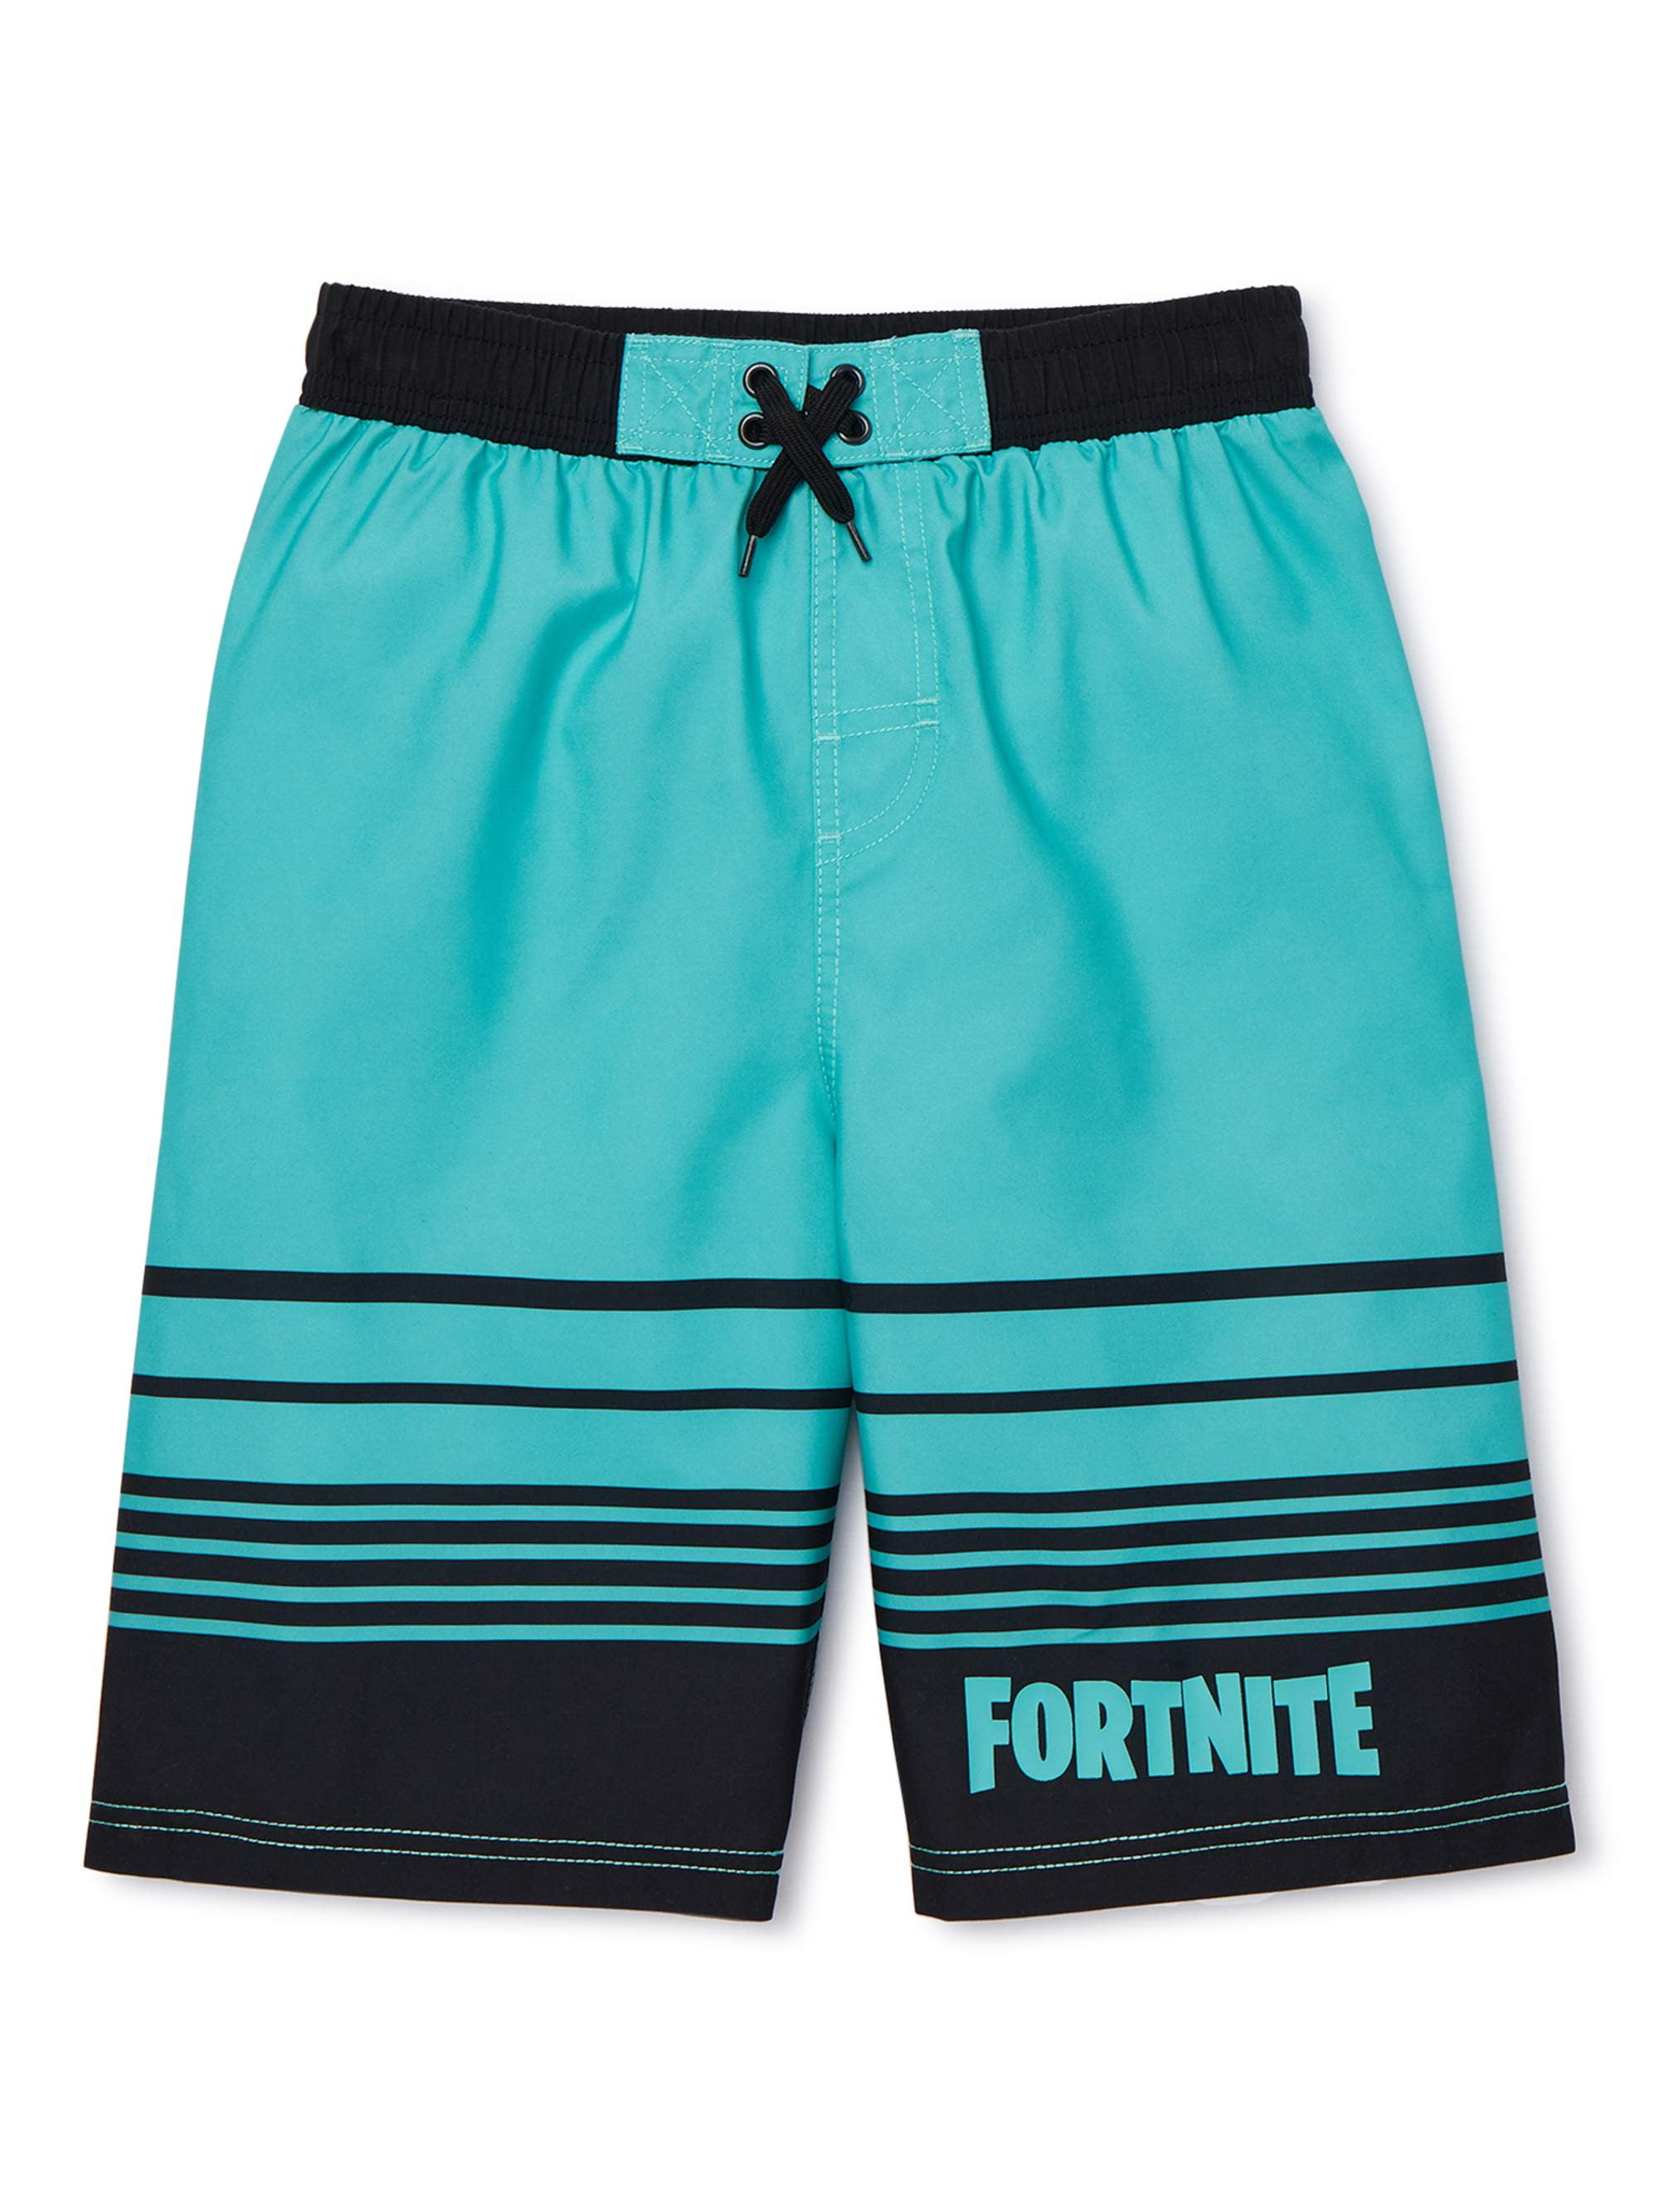 Epic Games Youth Swim Trunks Fortnite Quick Dry Swim Shorts Board Shorts Bathing Suits for Boys & Girls